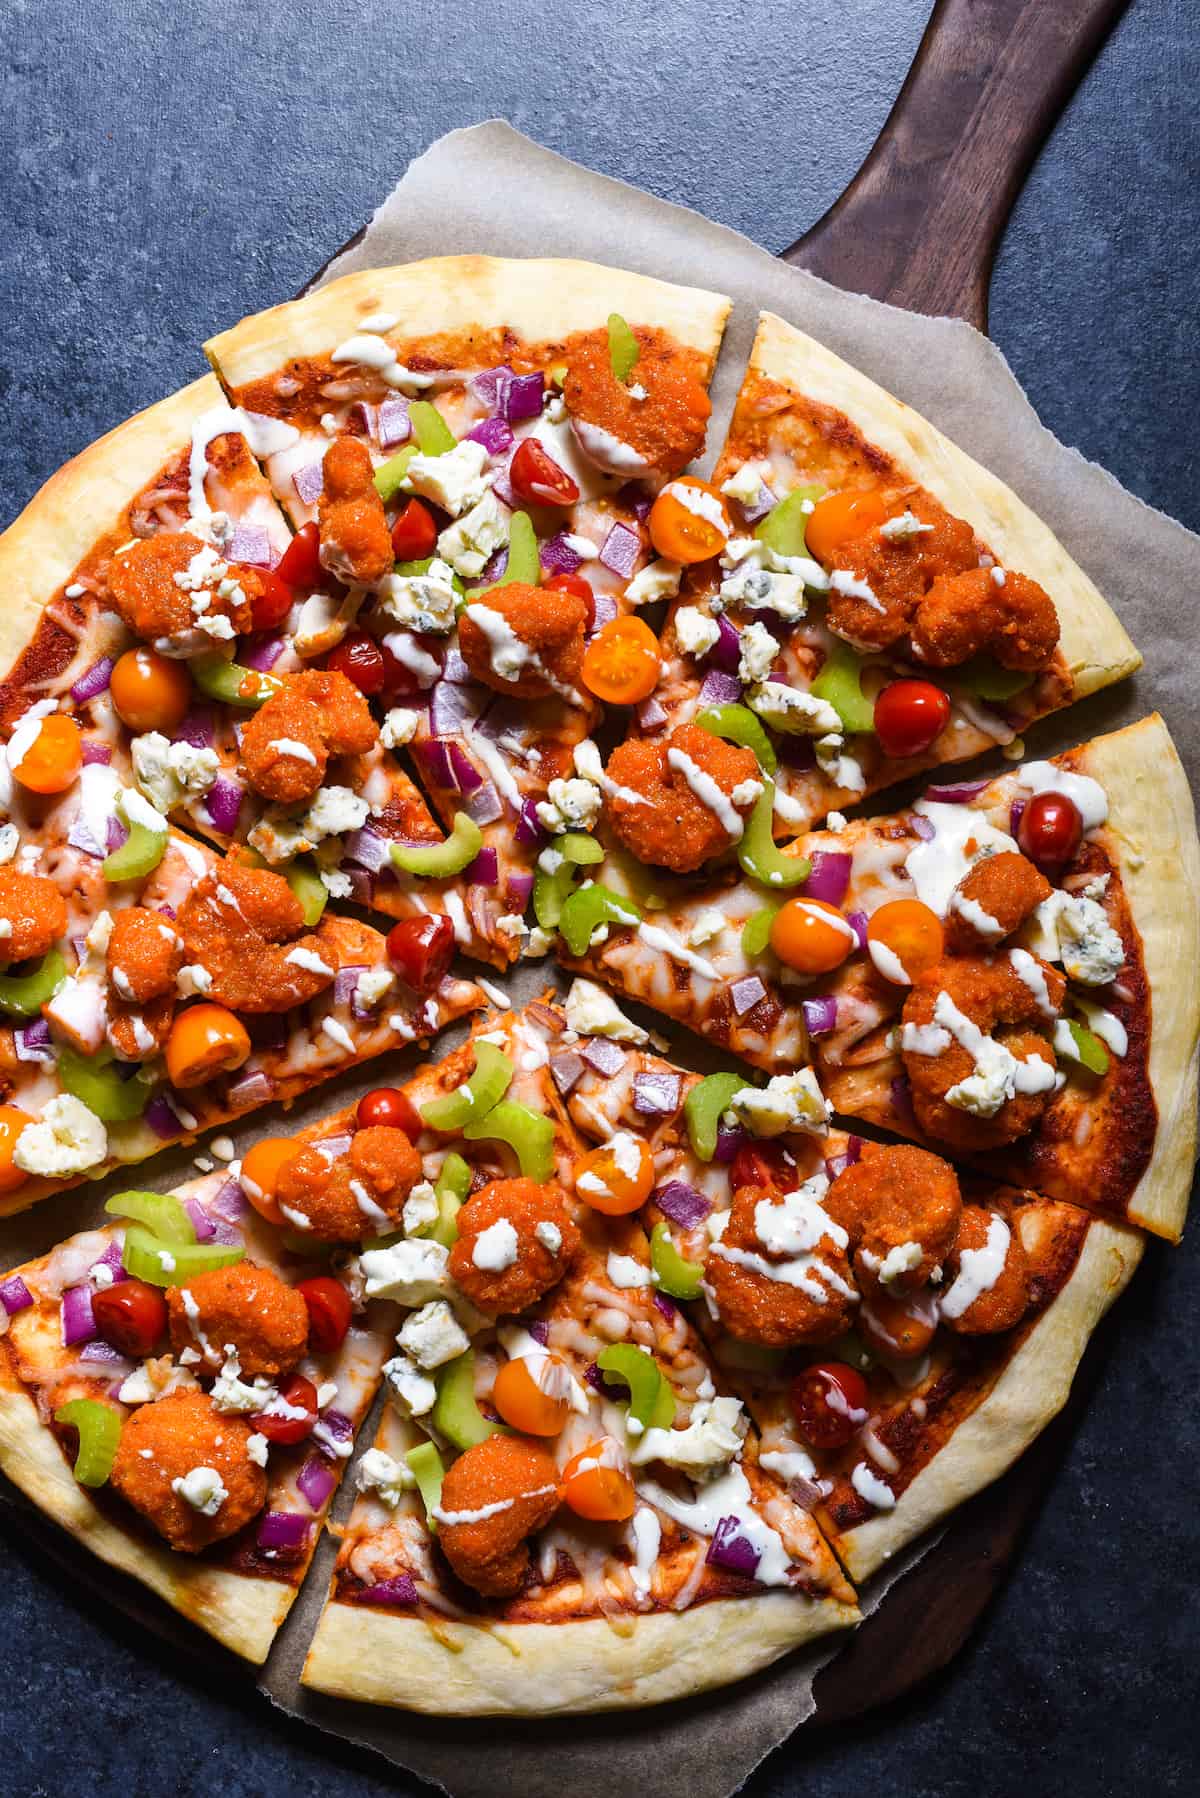 Buffalo shrimp pizza garnished with vegetables, blue cheese and ranch dressing.